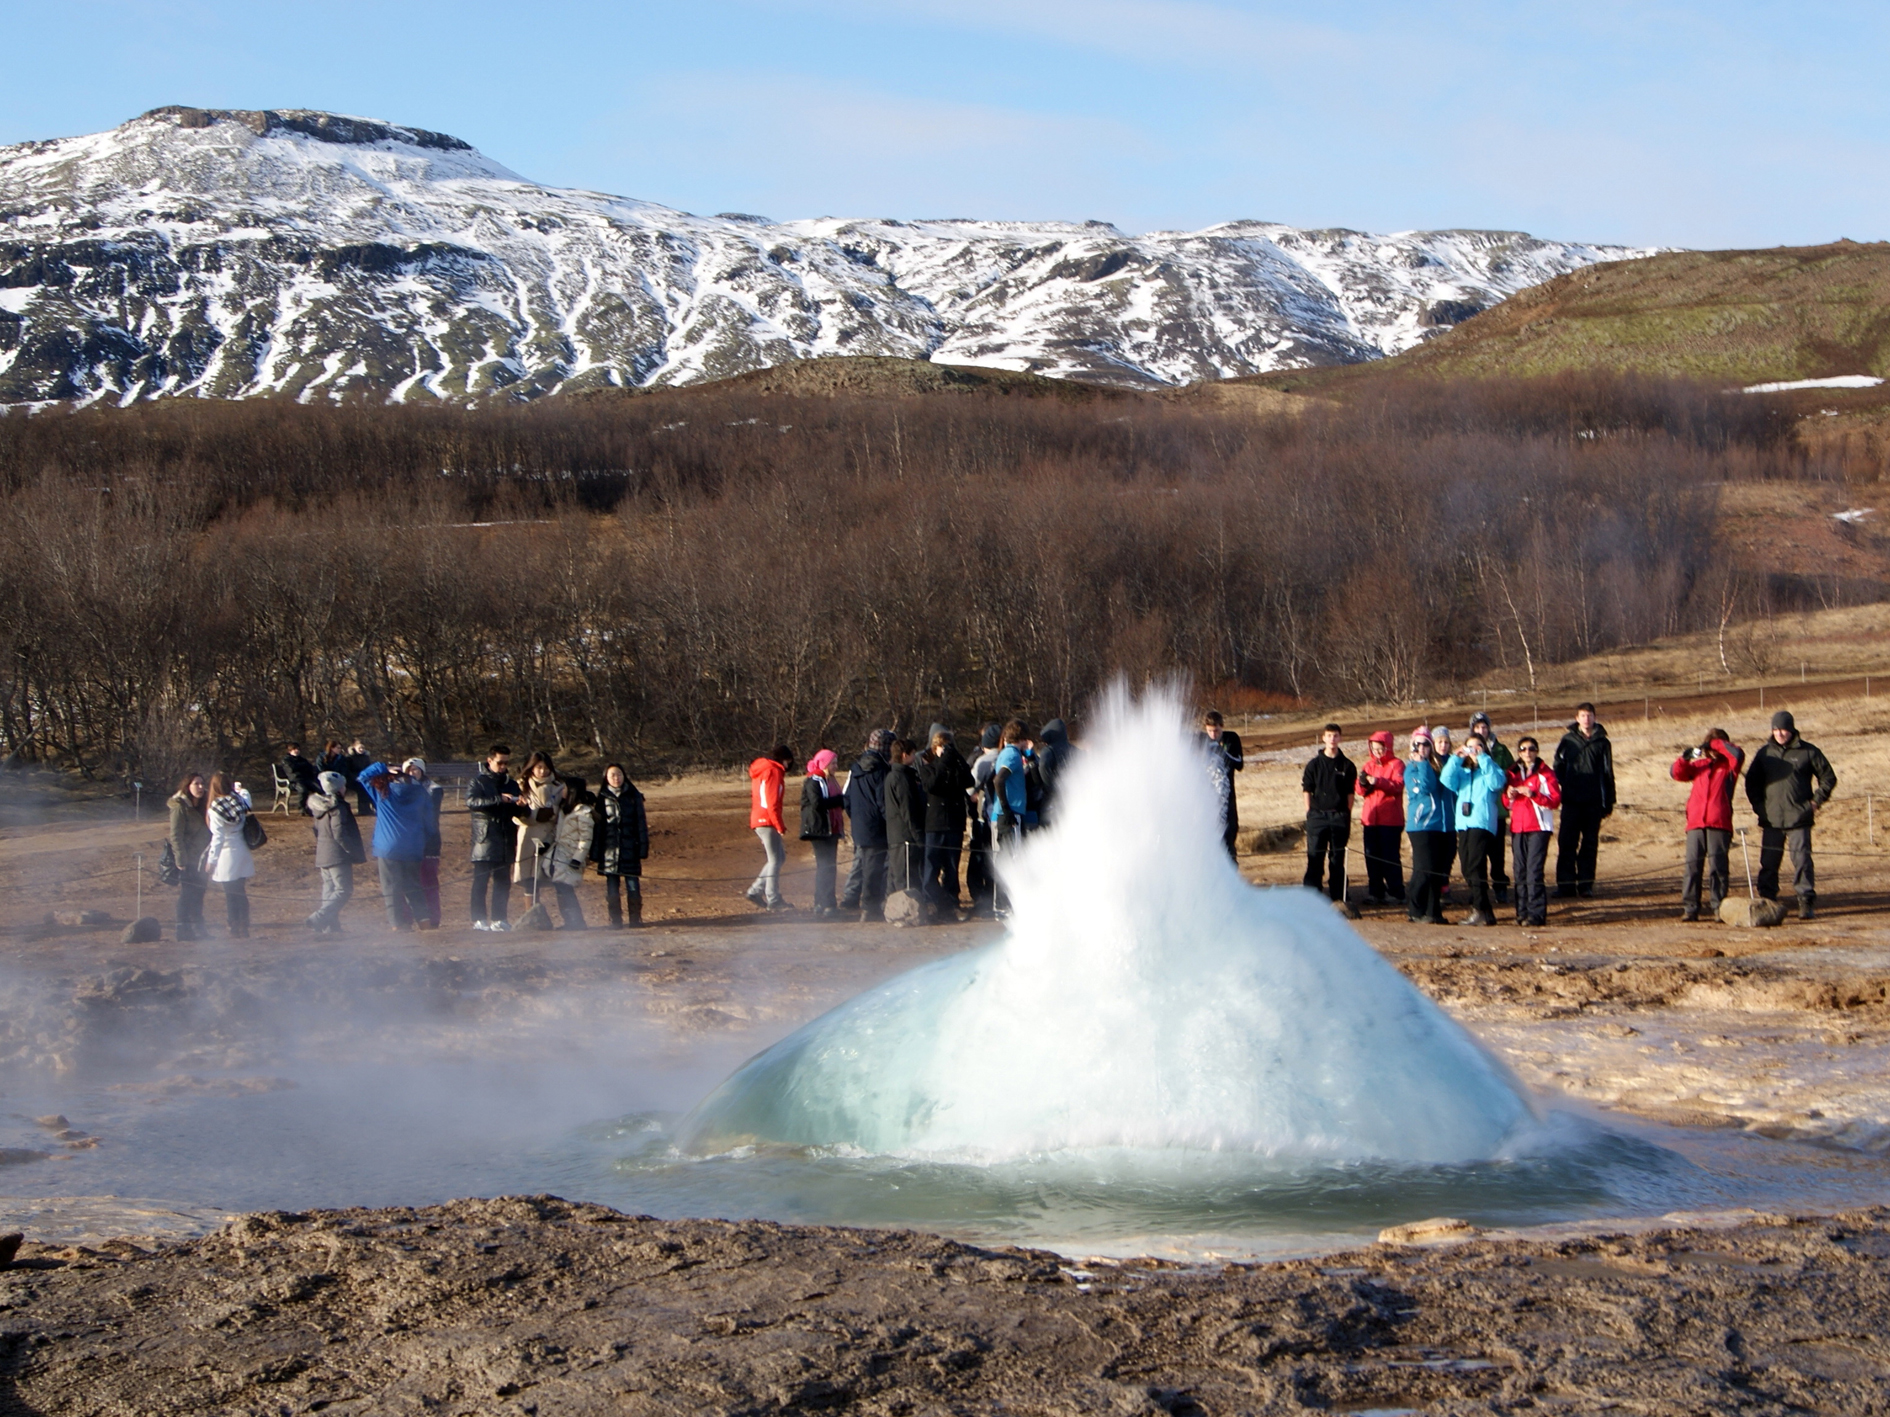 Day 4 - Geysers and Gullfoss on the Golden Circle